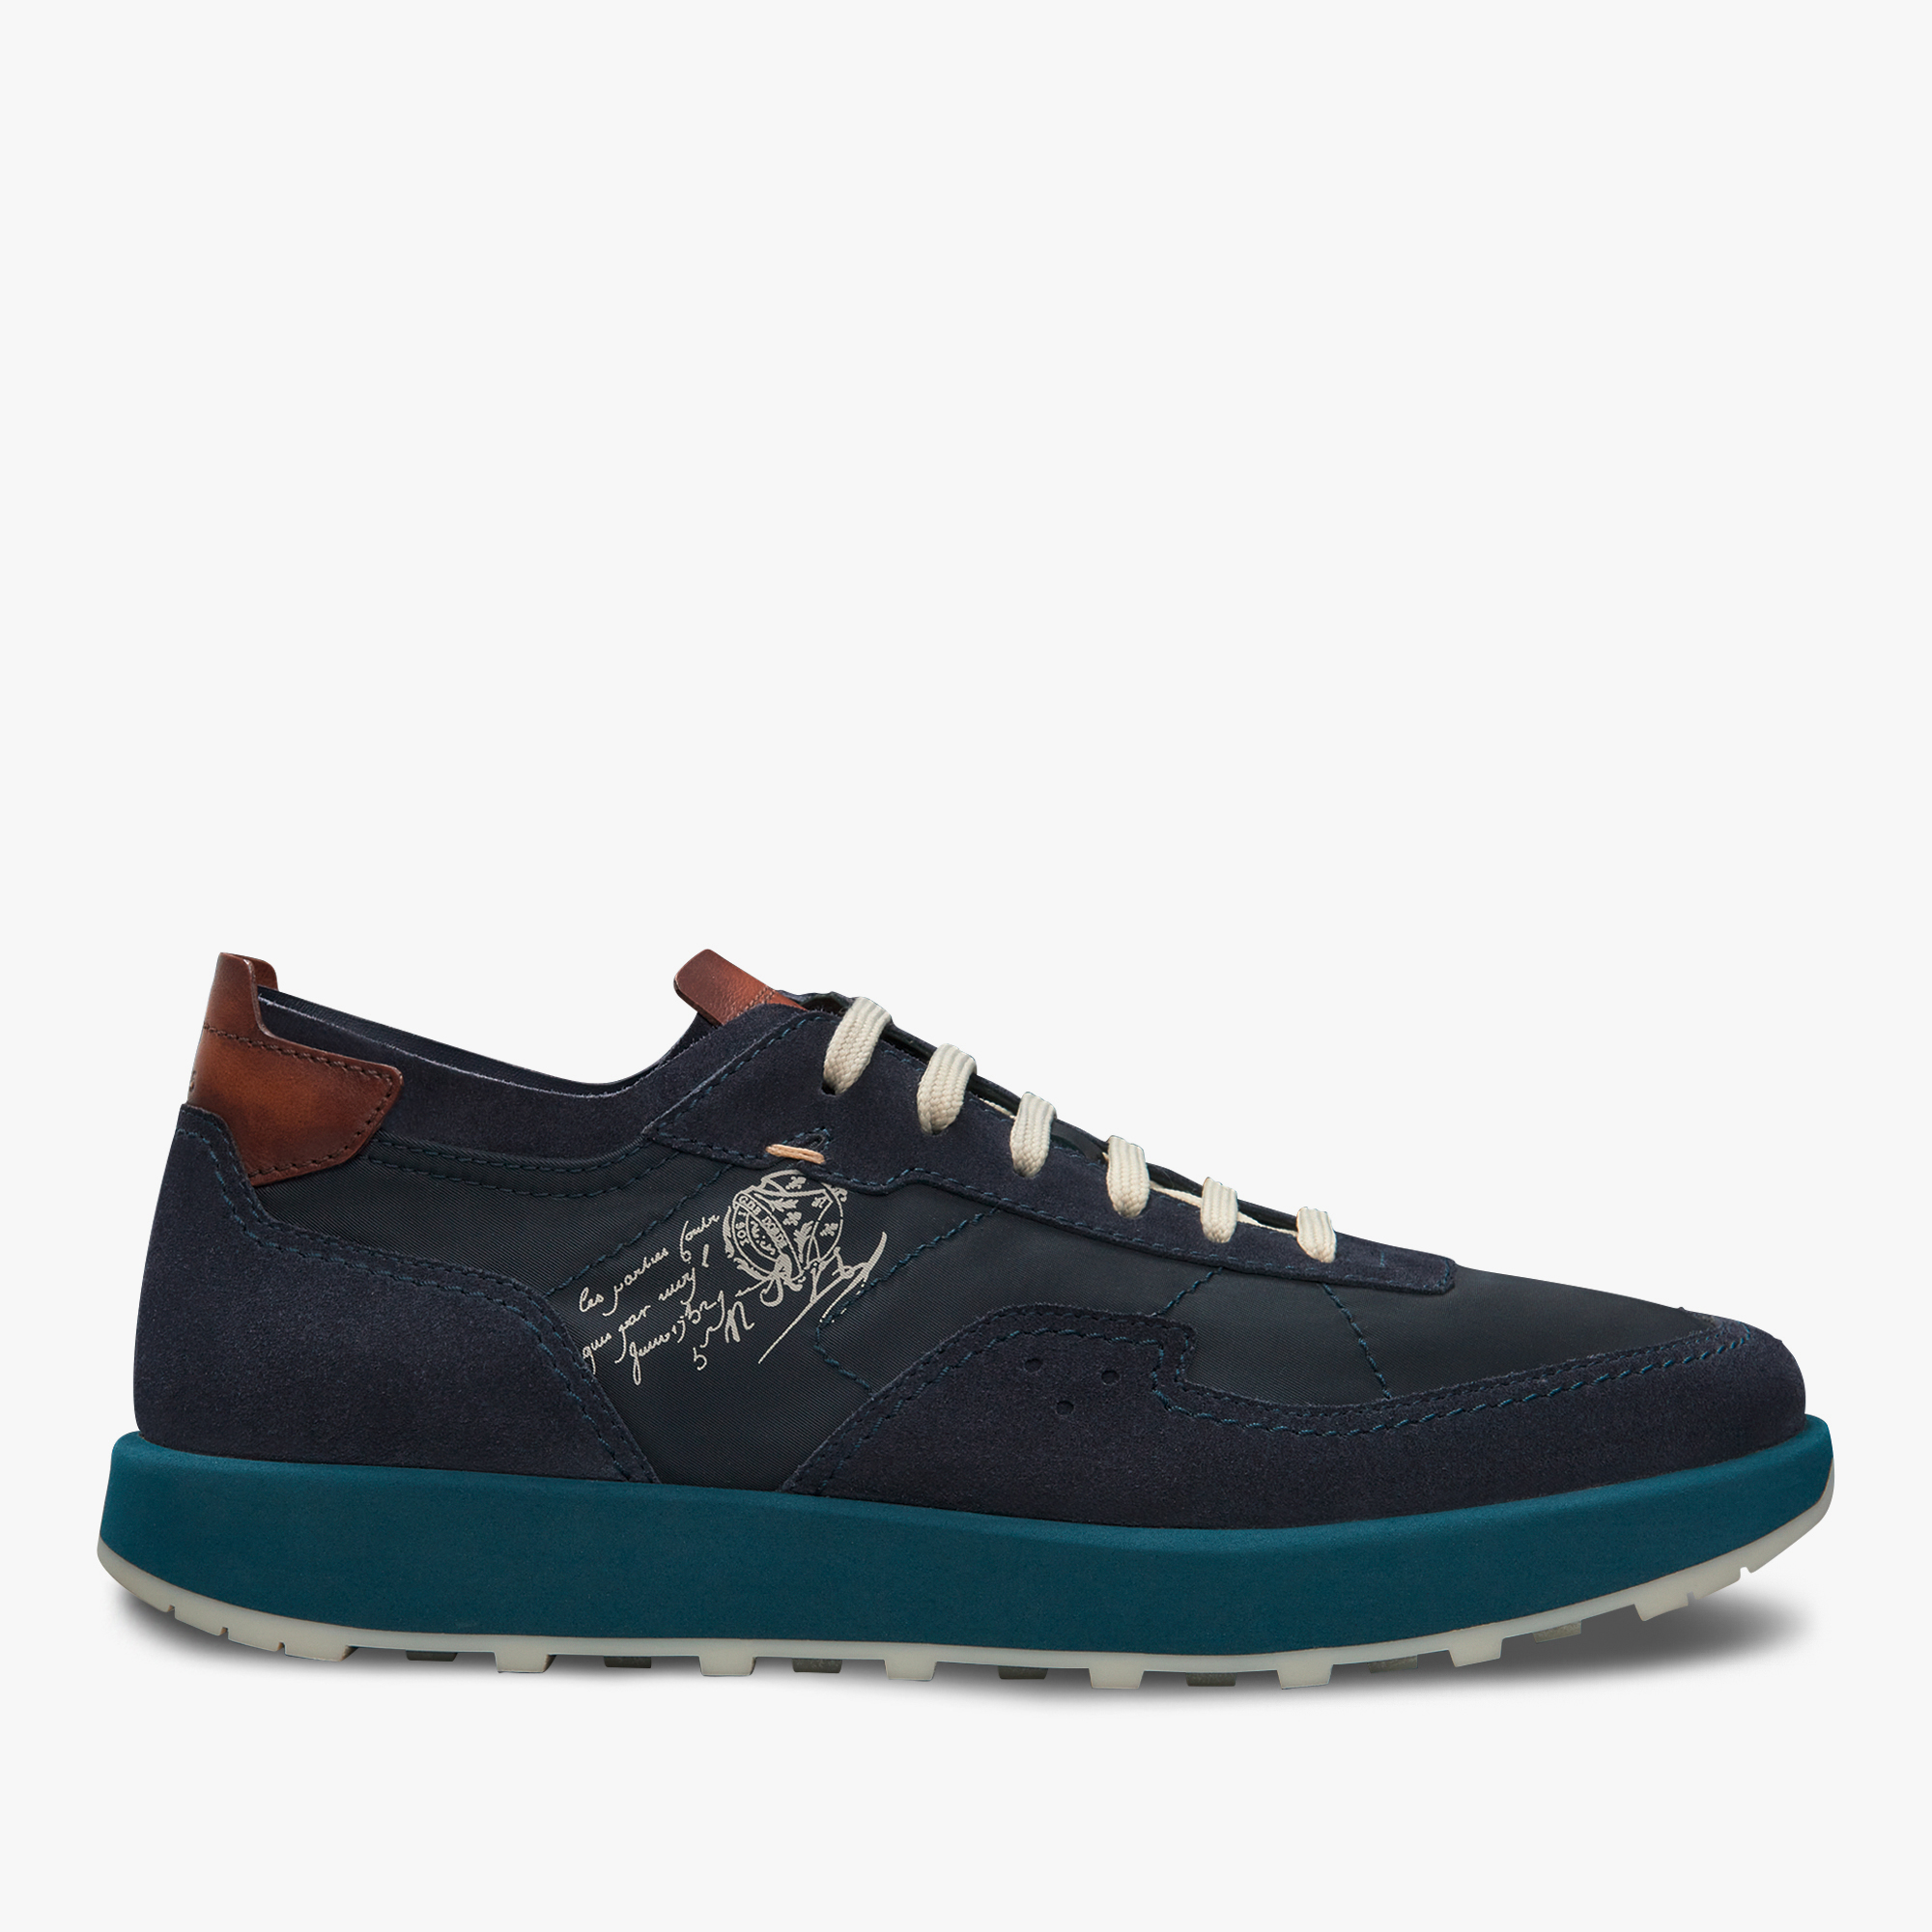 Light Track Suede Leather and Nylon Sneaker, NAVY, hi-res